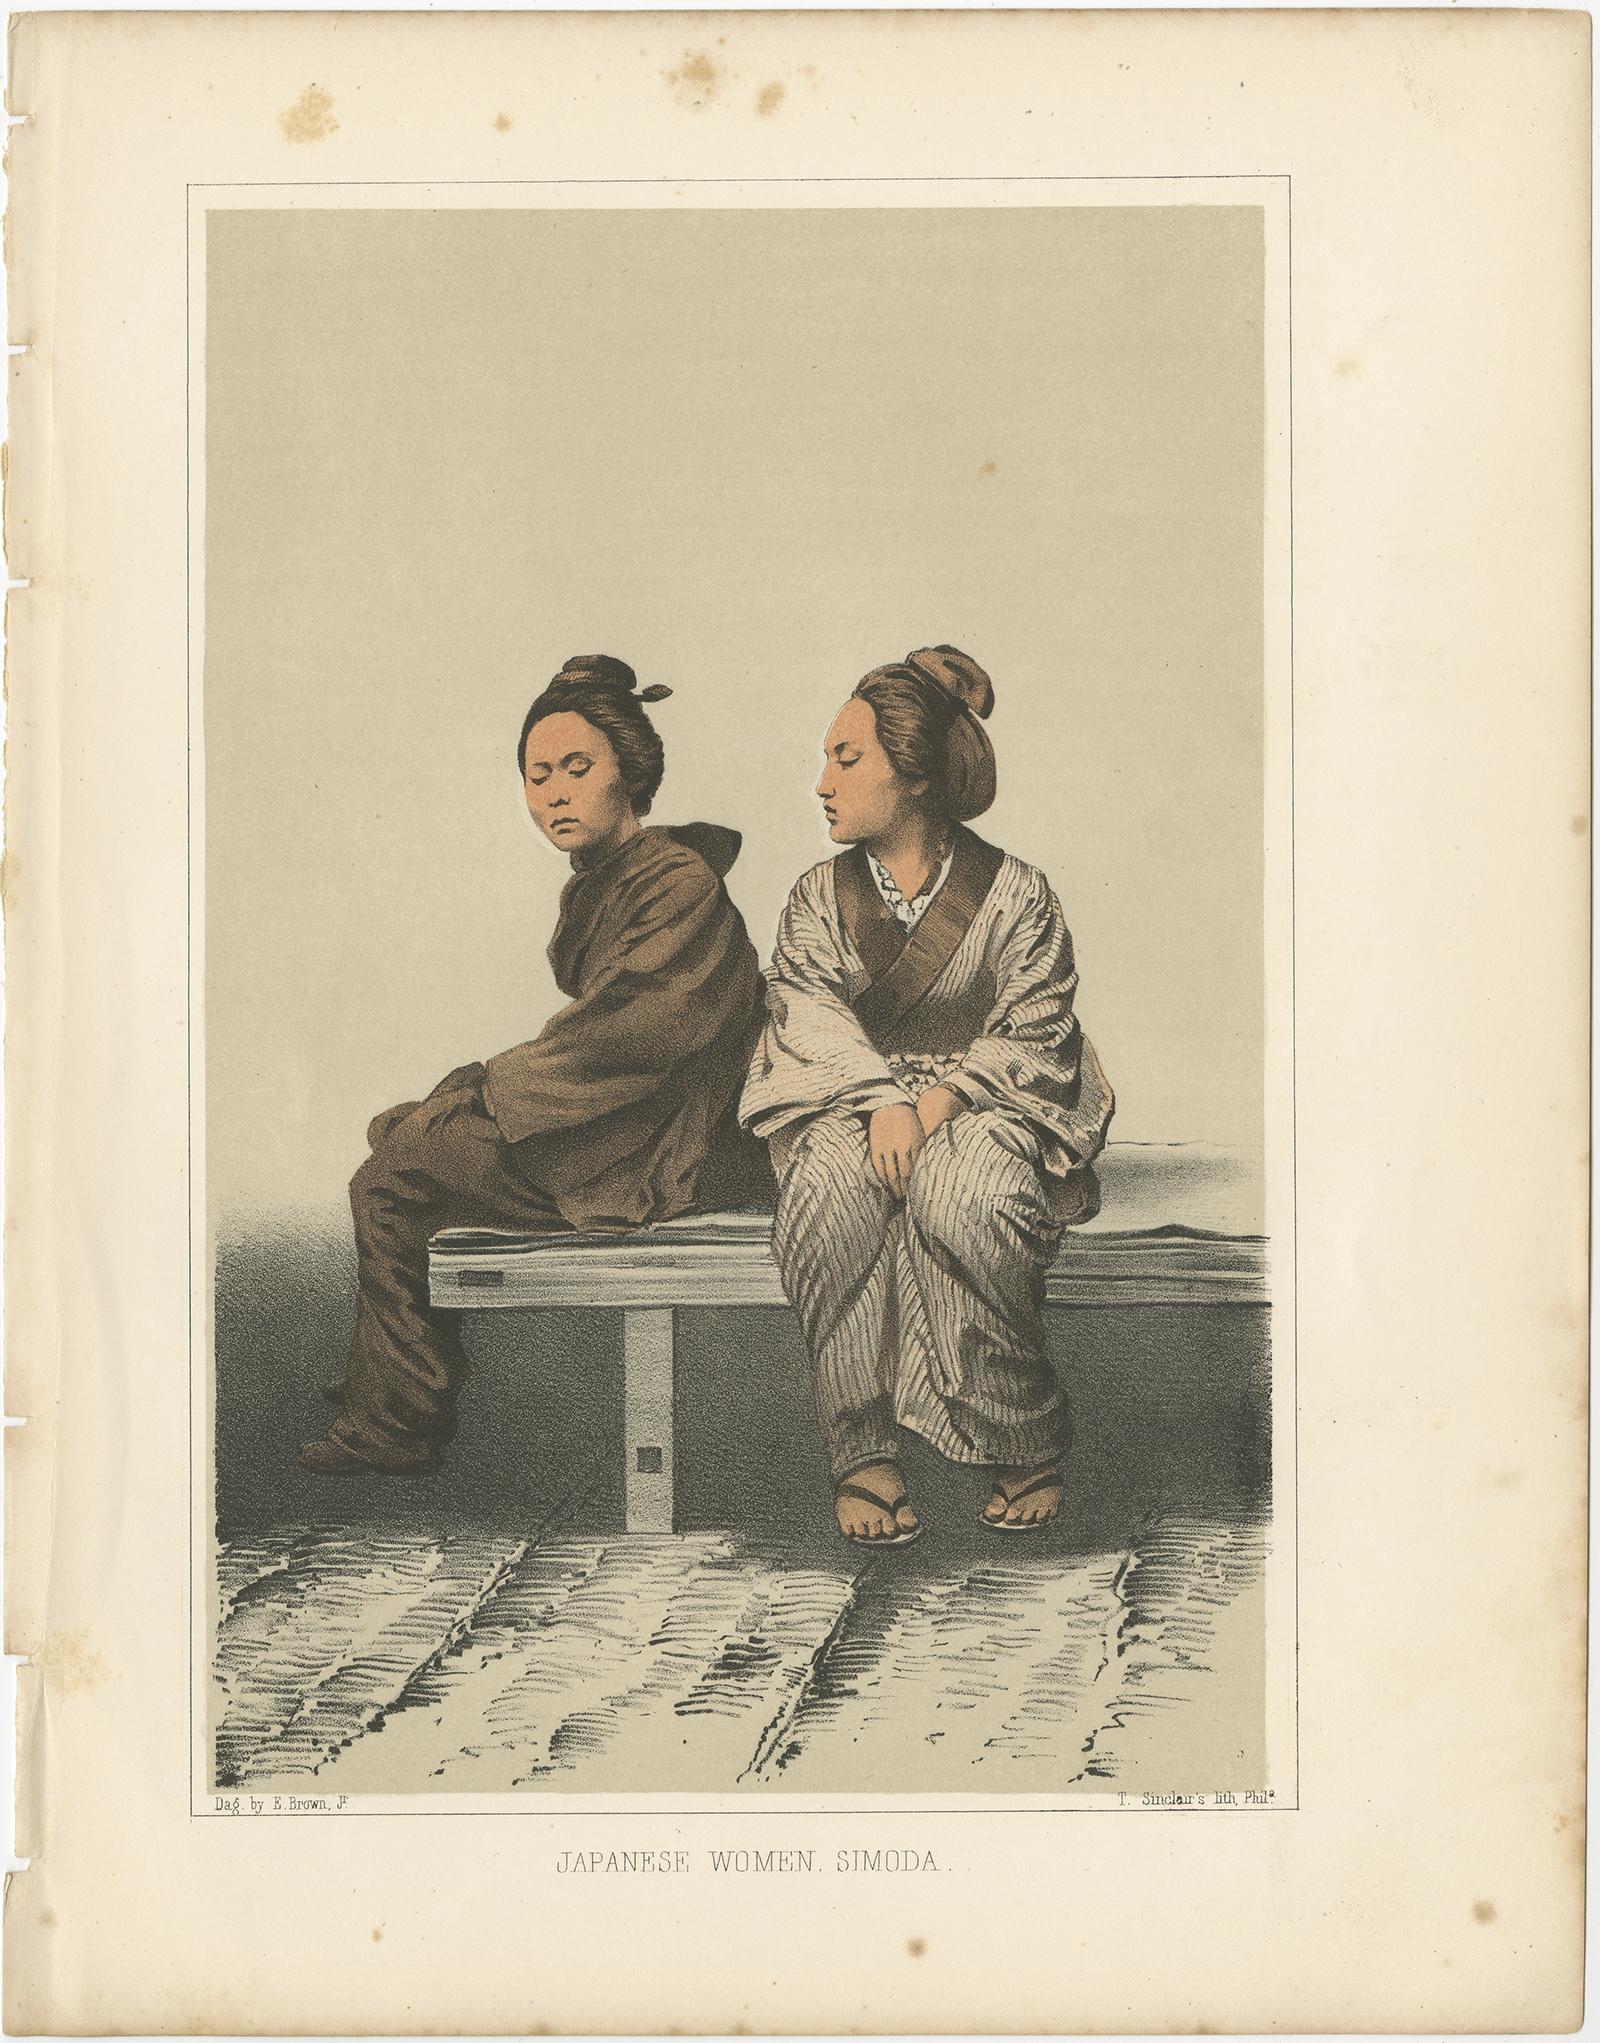 Antique print titled 'Japanese Women, Simoda‘. 

Portrait of two Japanese women, full-length, seated on a bench or raised sleeping area. This print originates from 'Narrative of the expedition of an American squadron to the China seas and Japan,